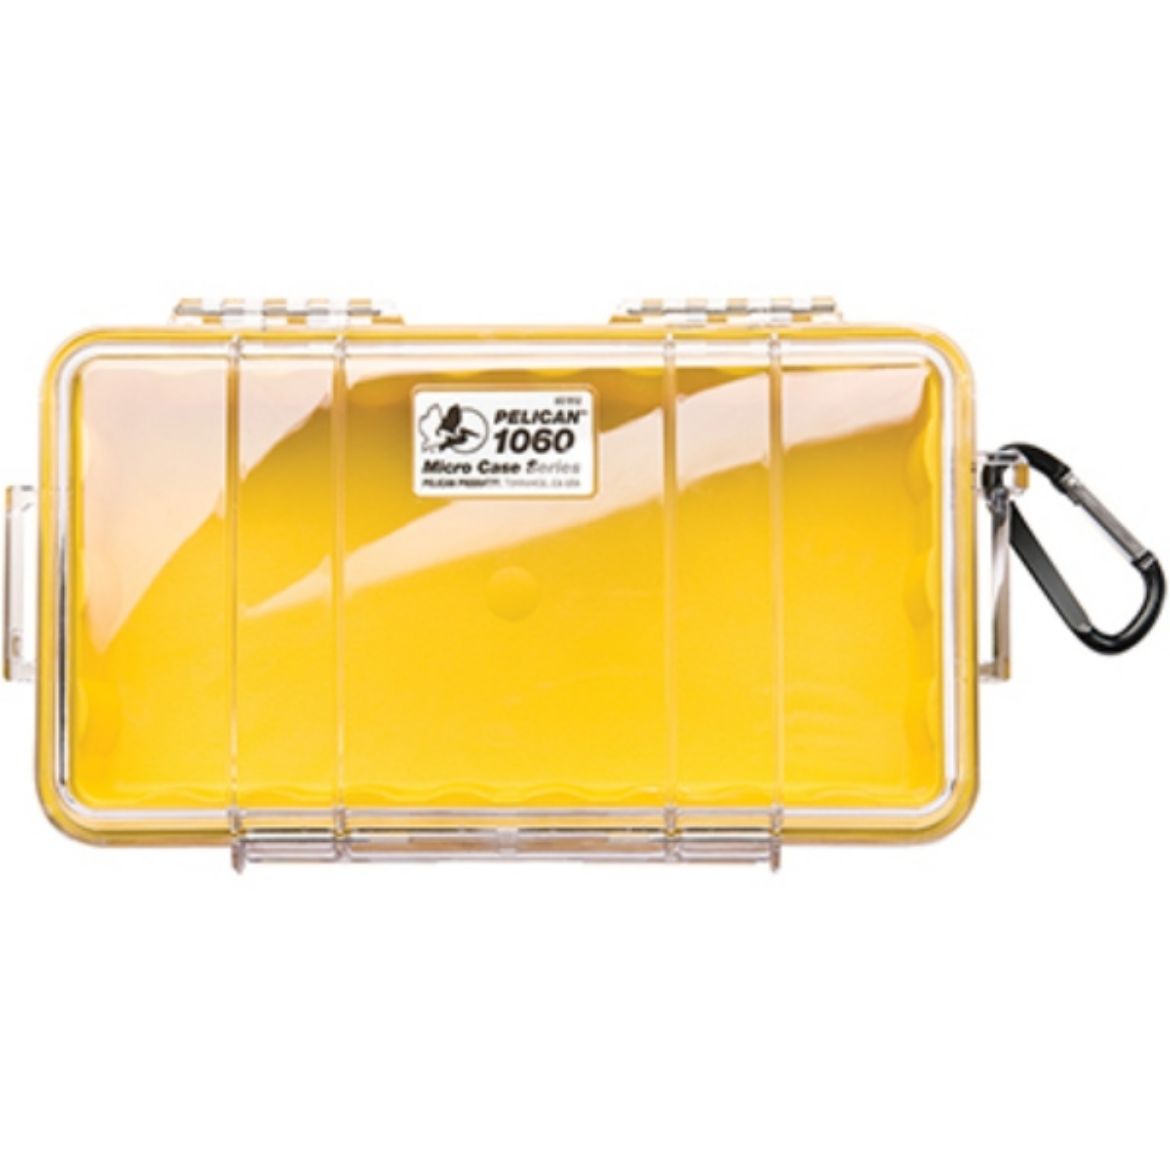 Picture of # 1060 MICRO PELICAN CASE - CLEAR WITH YELLOW